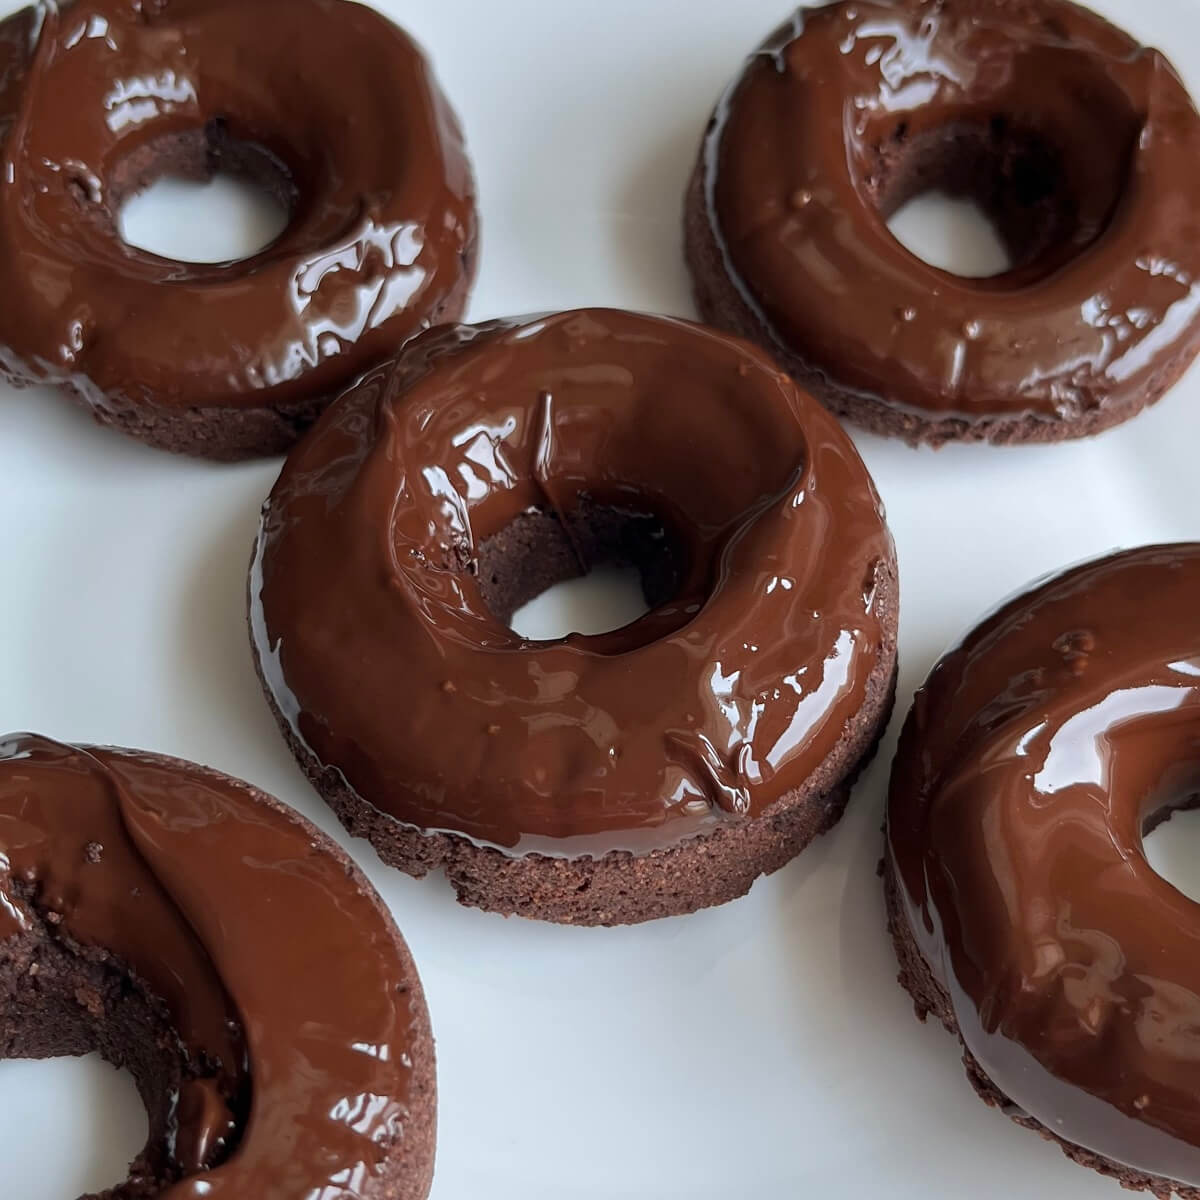 Vegan glazed donuts on a white plate.